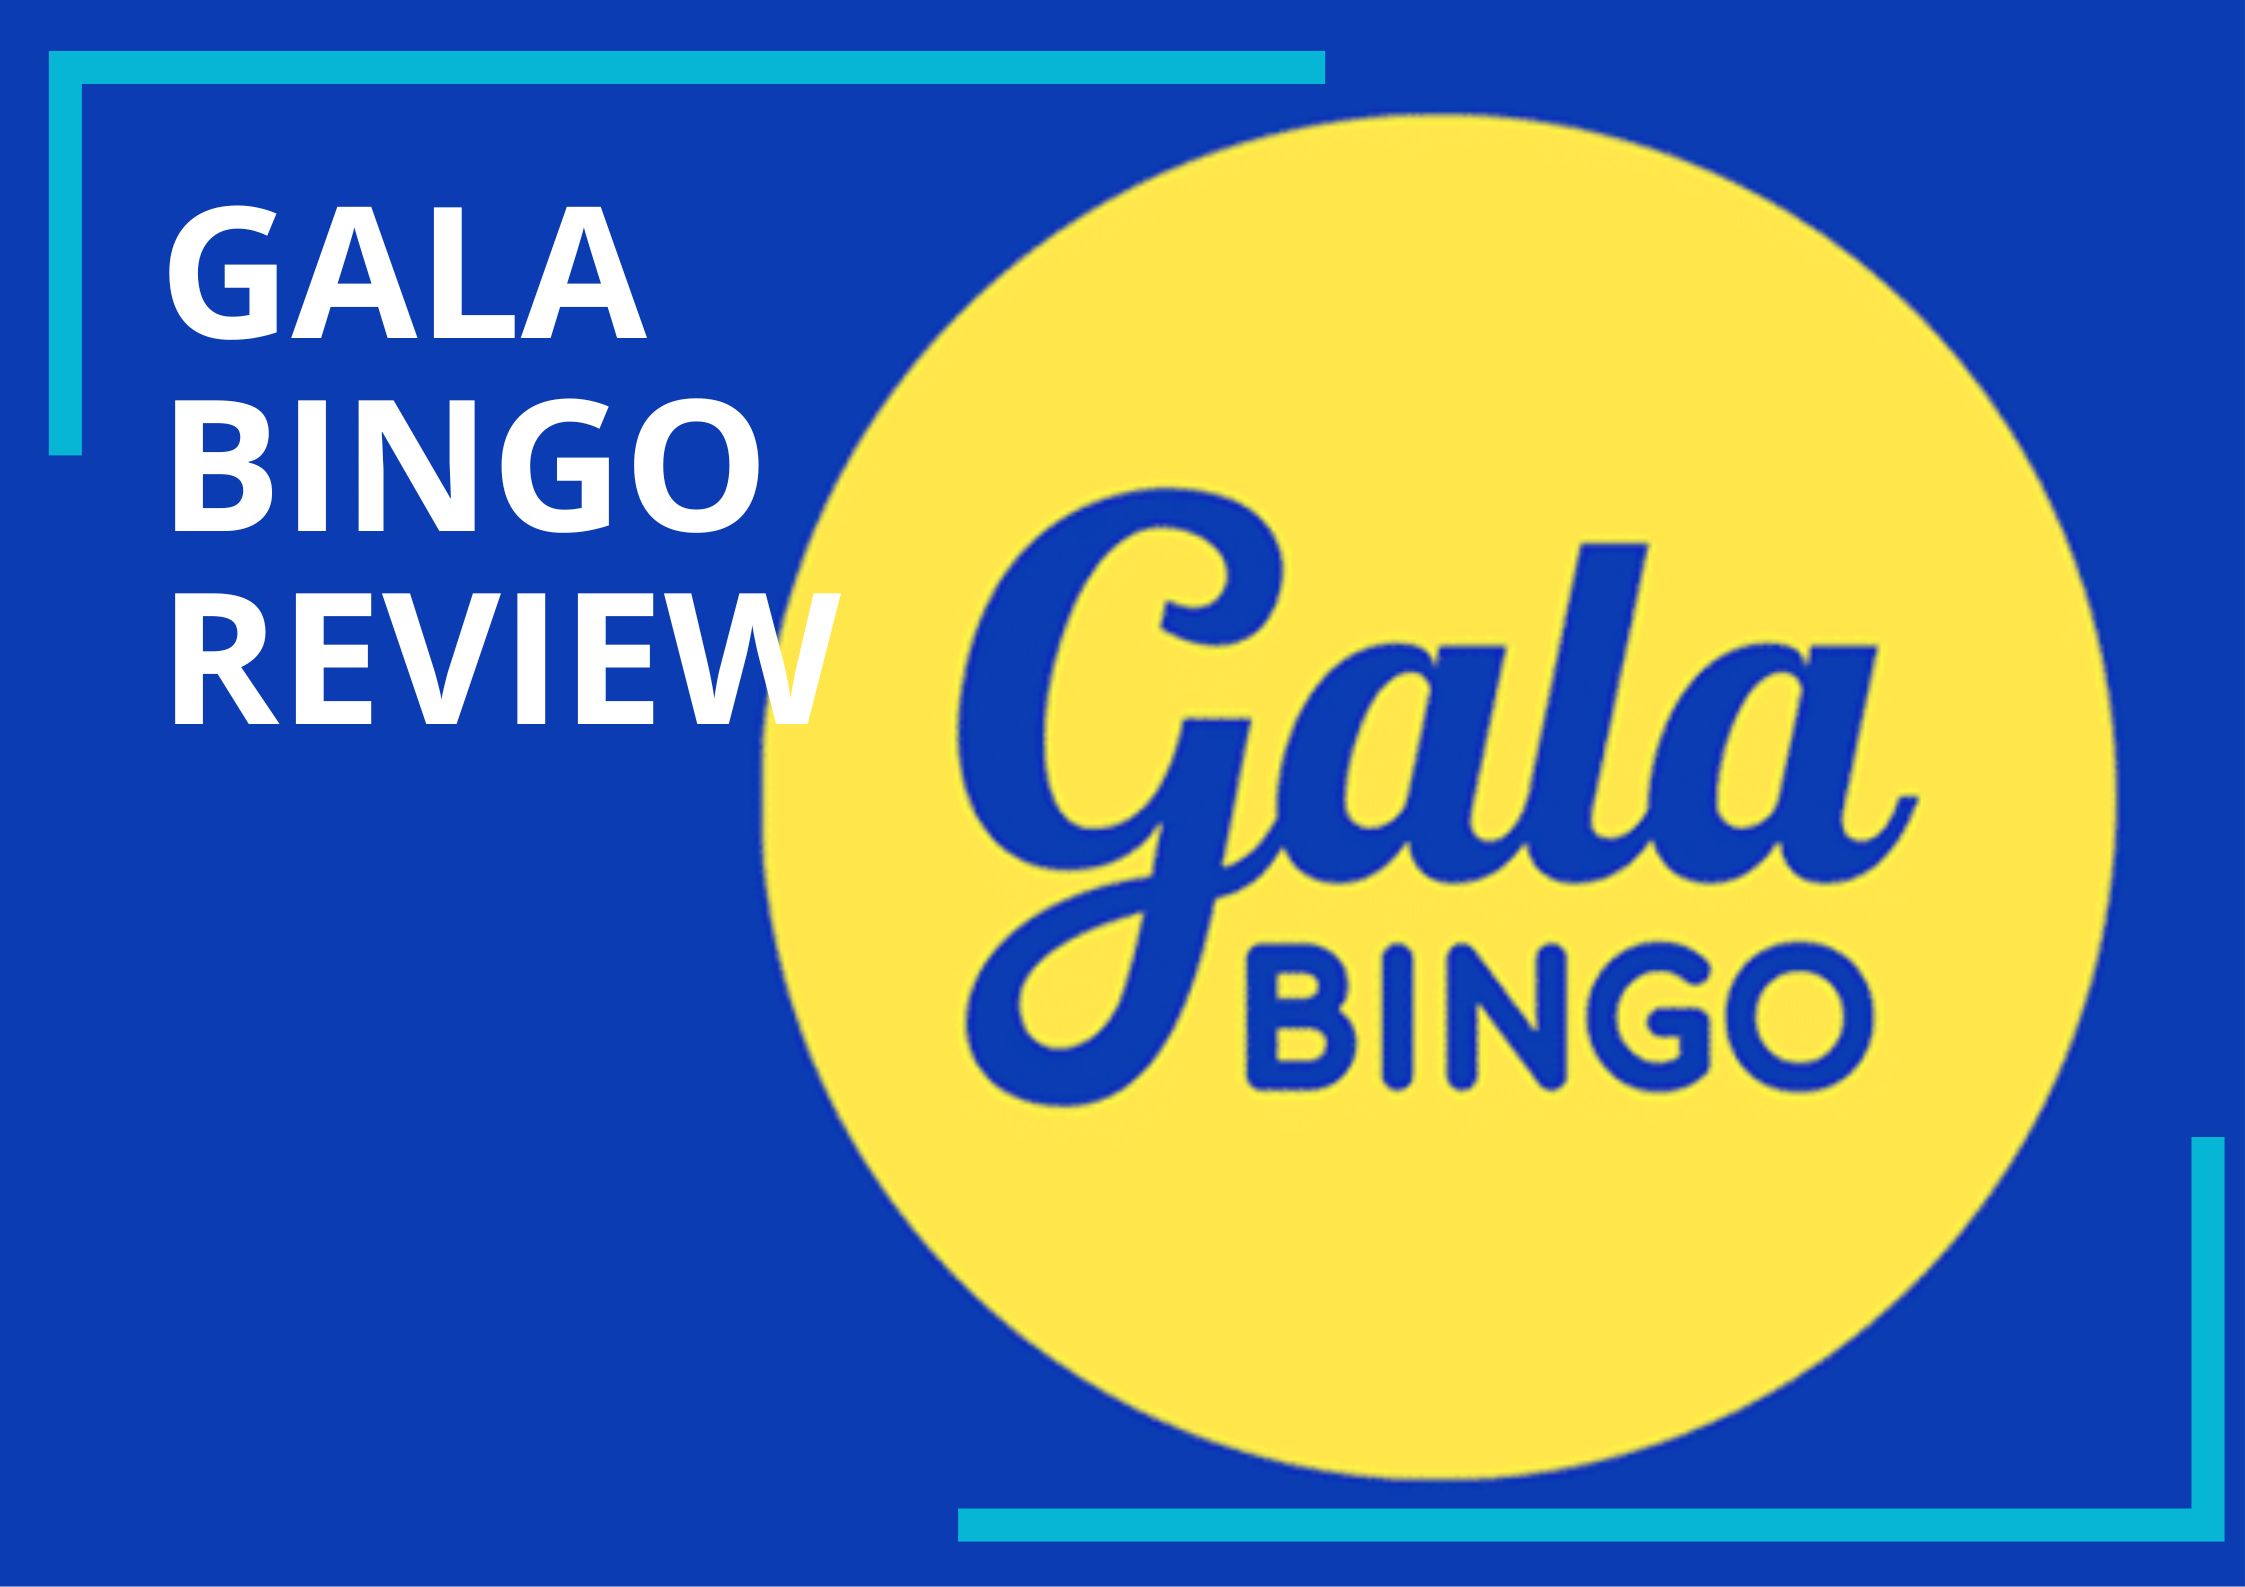 Gala Bingo full review: Games, bonuses, and tips for a more successful game